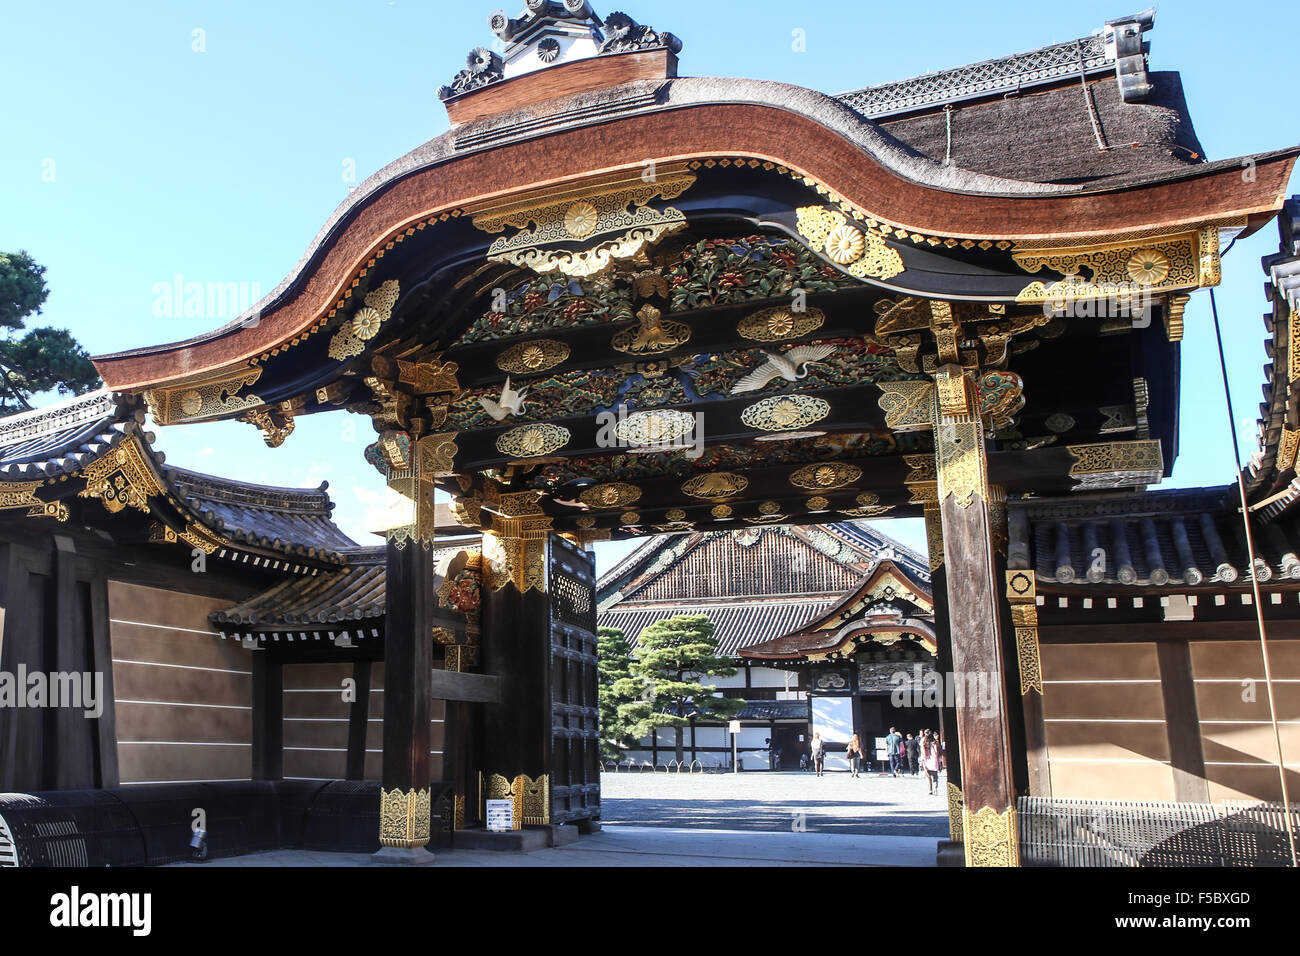 Kyoto imperial palace gate Stock Photo